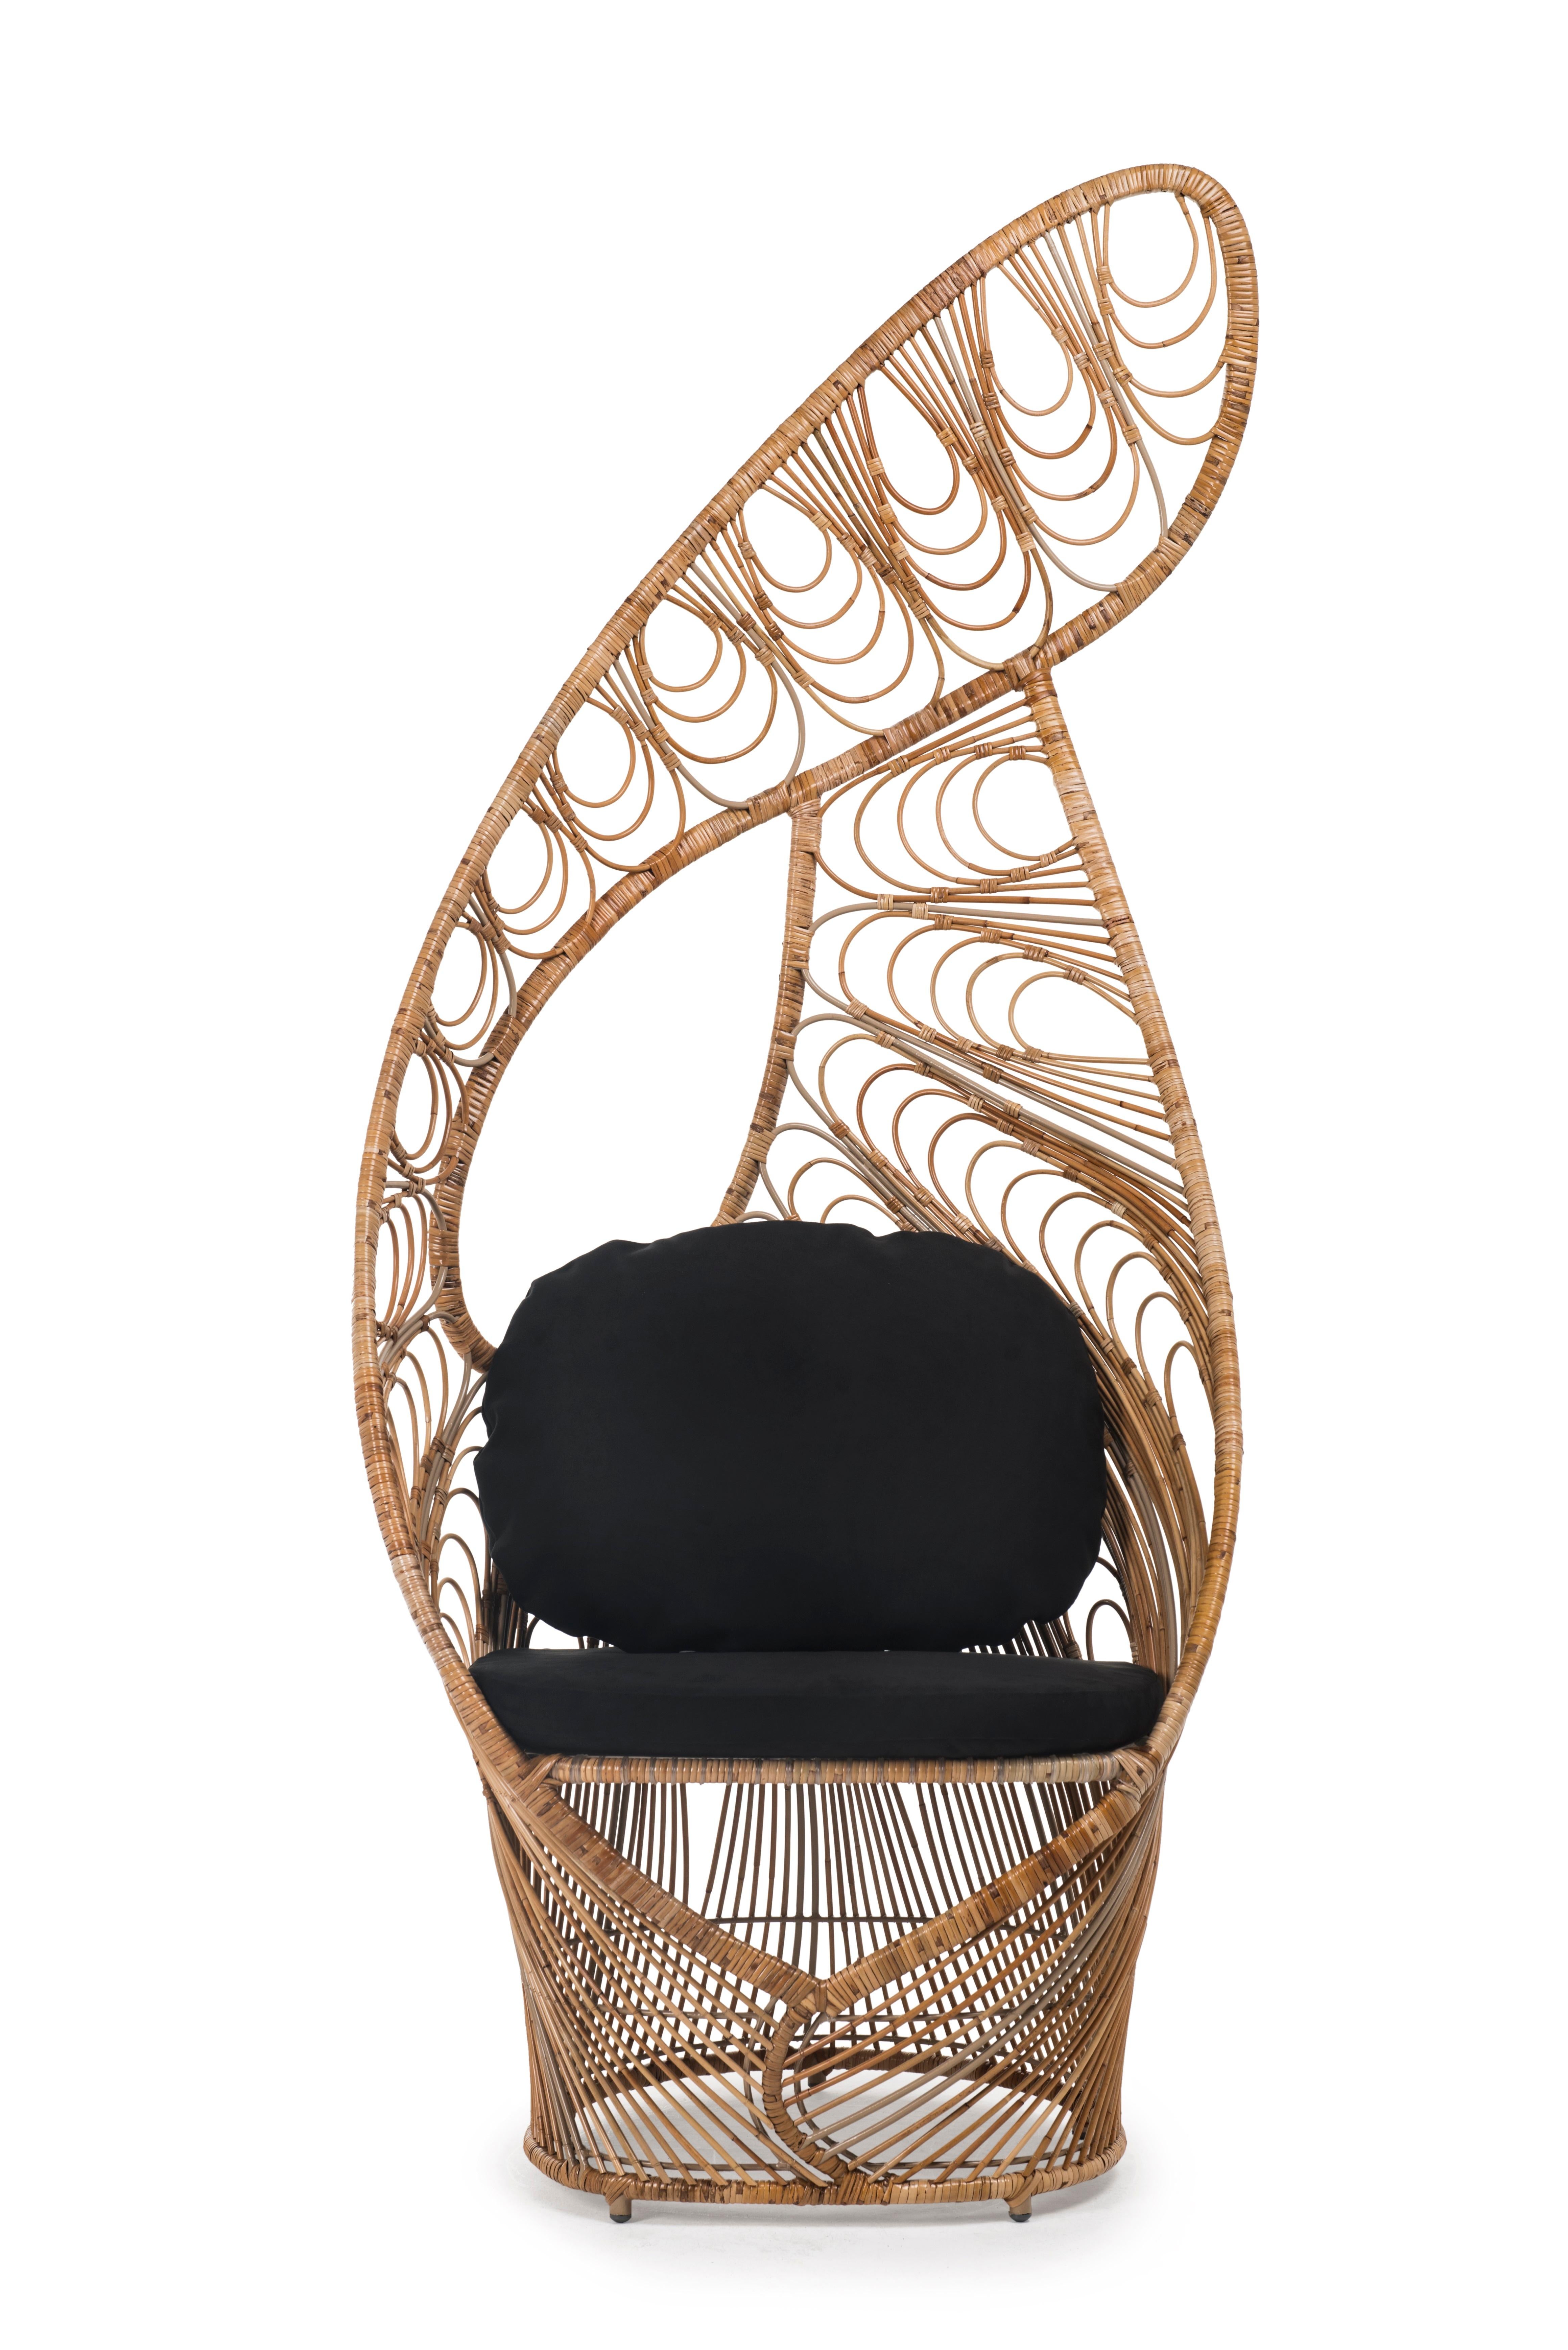 Philippine Peacock Easy Armchair by Kenneth Cobonpue For Sale